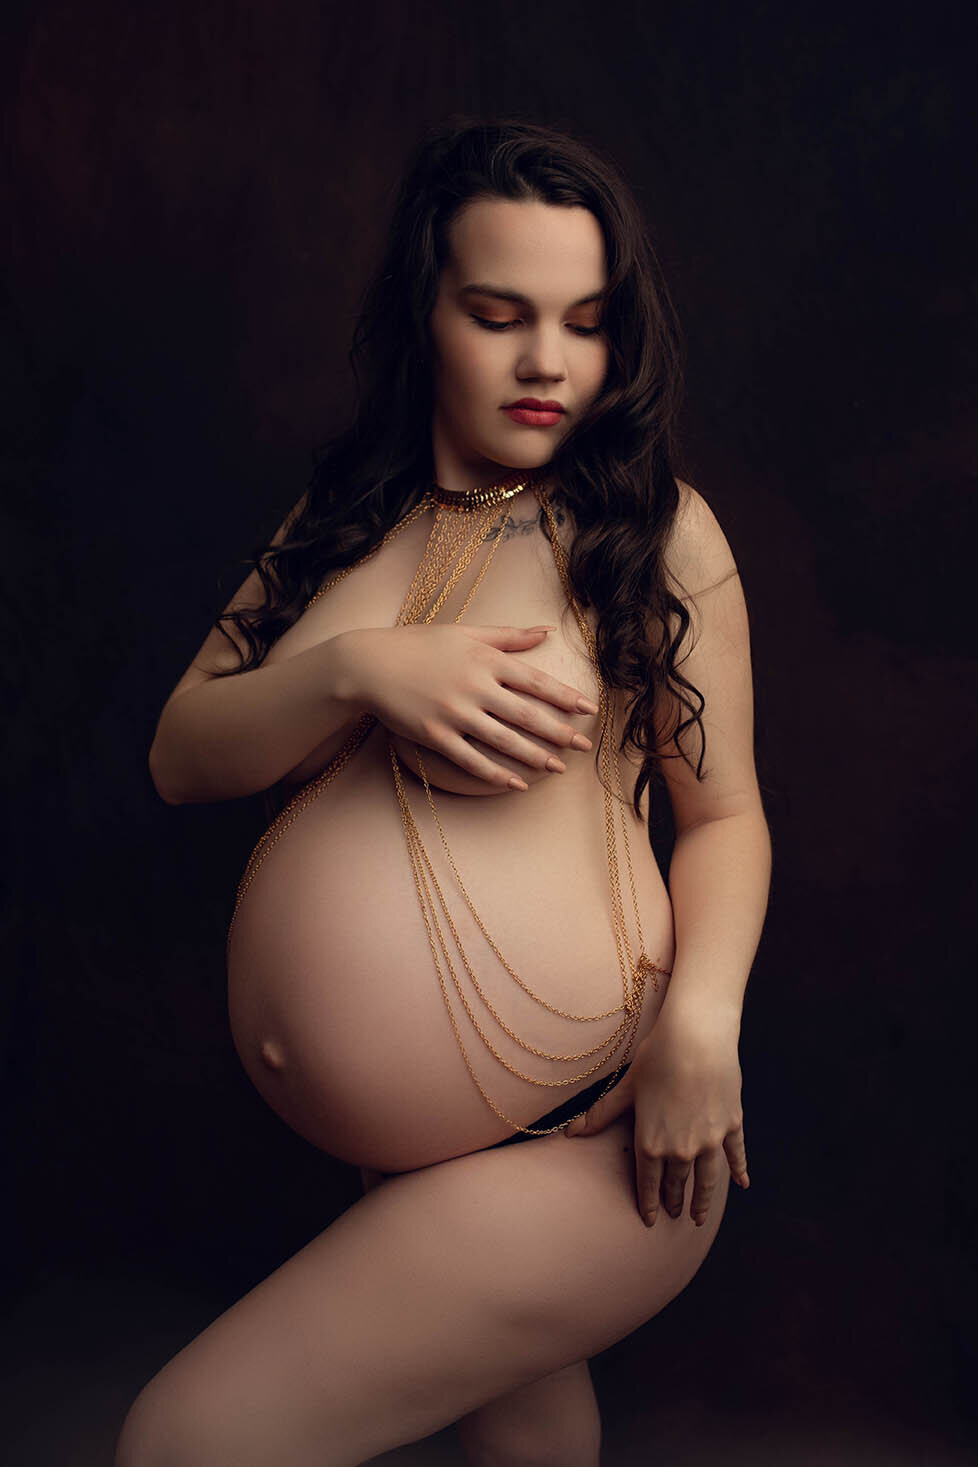 A mostly nude pregnant woman wearing a bodysuit covering her breasts with her hand